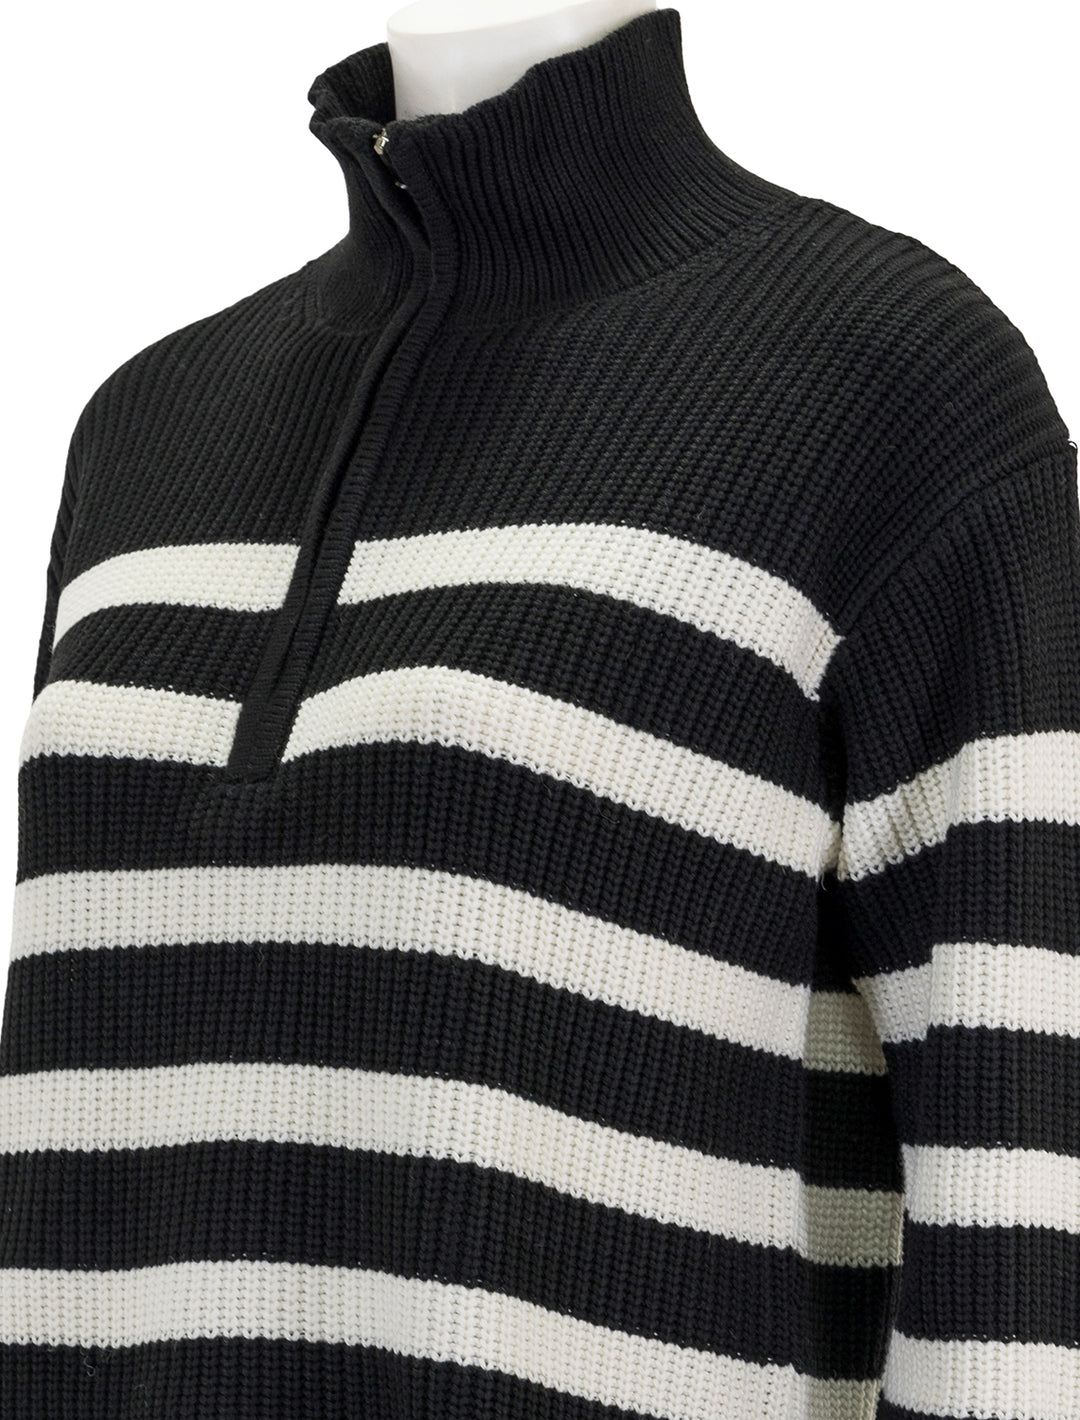 Close-up view of English Factory's striped half zip sweater in black and white.